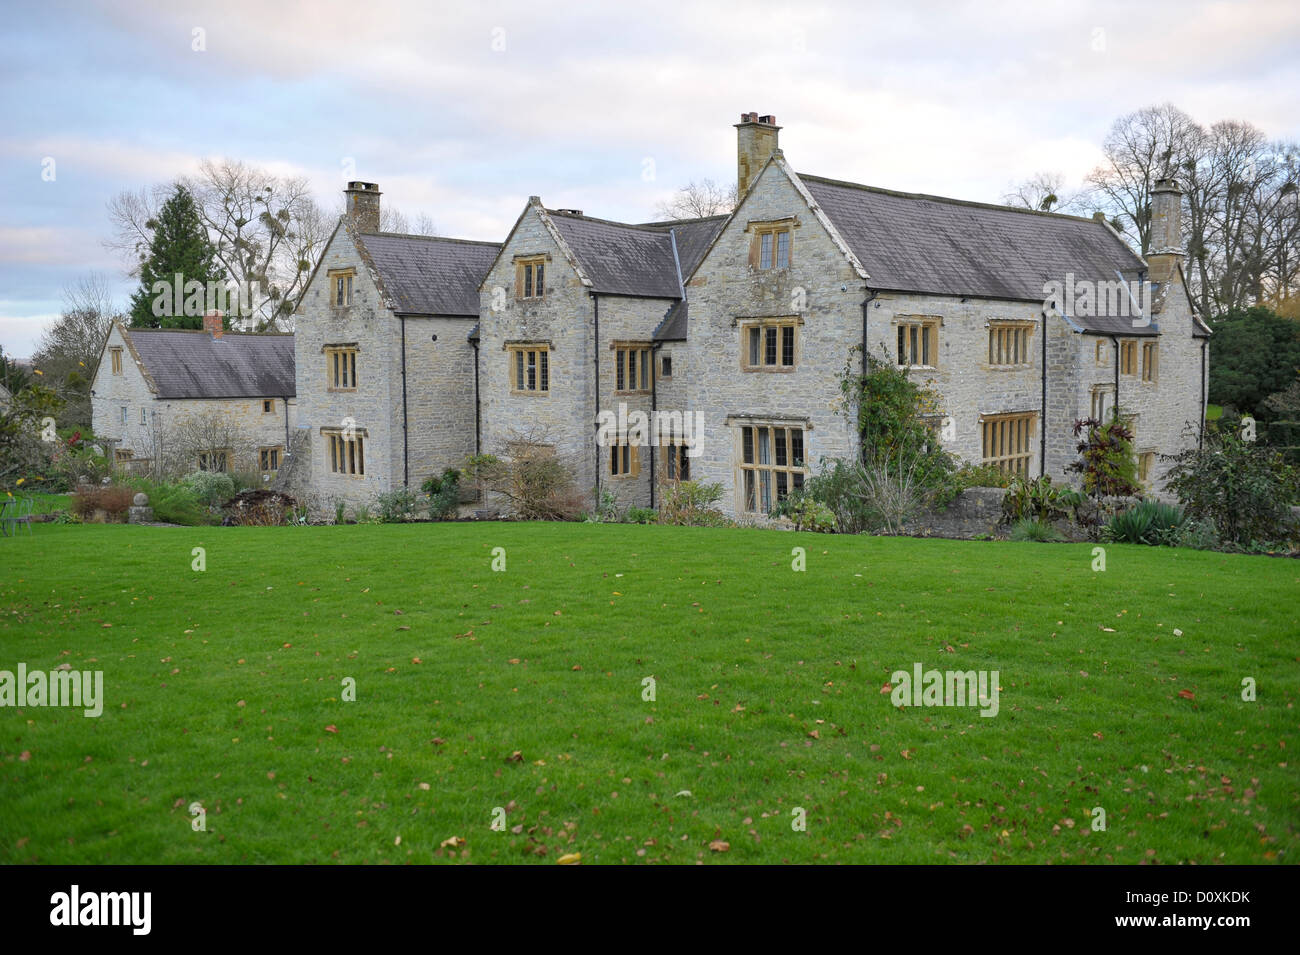 A rural country house in the English countryside that includes architectural features and grounds Stock Photo